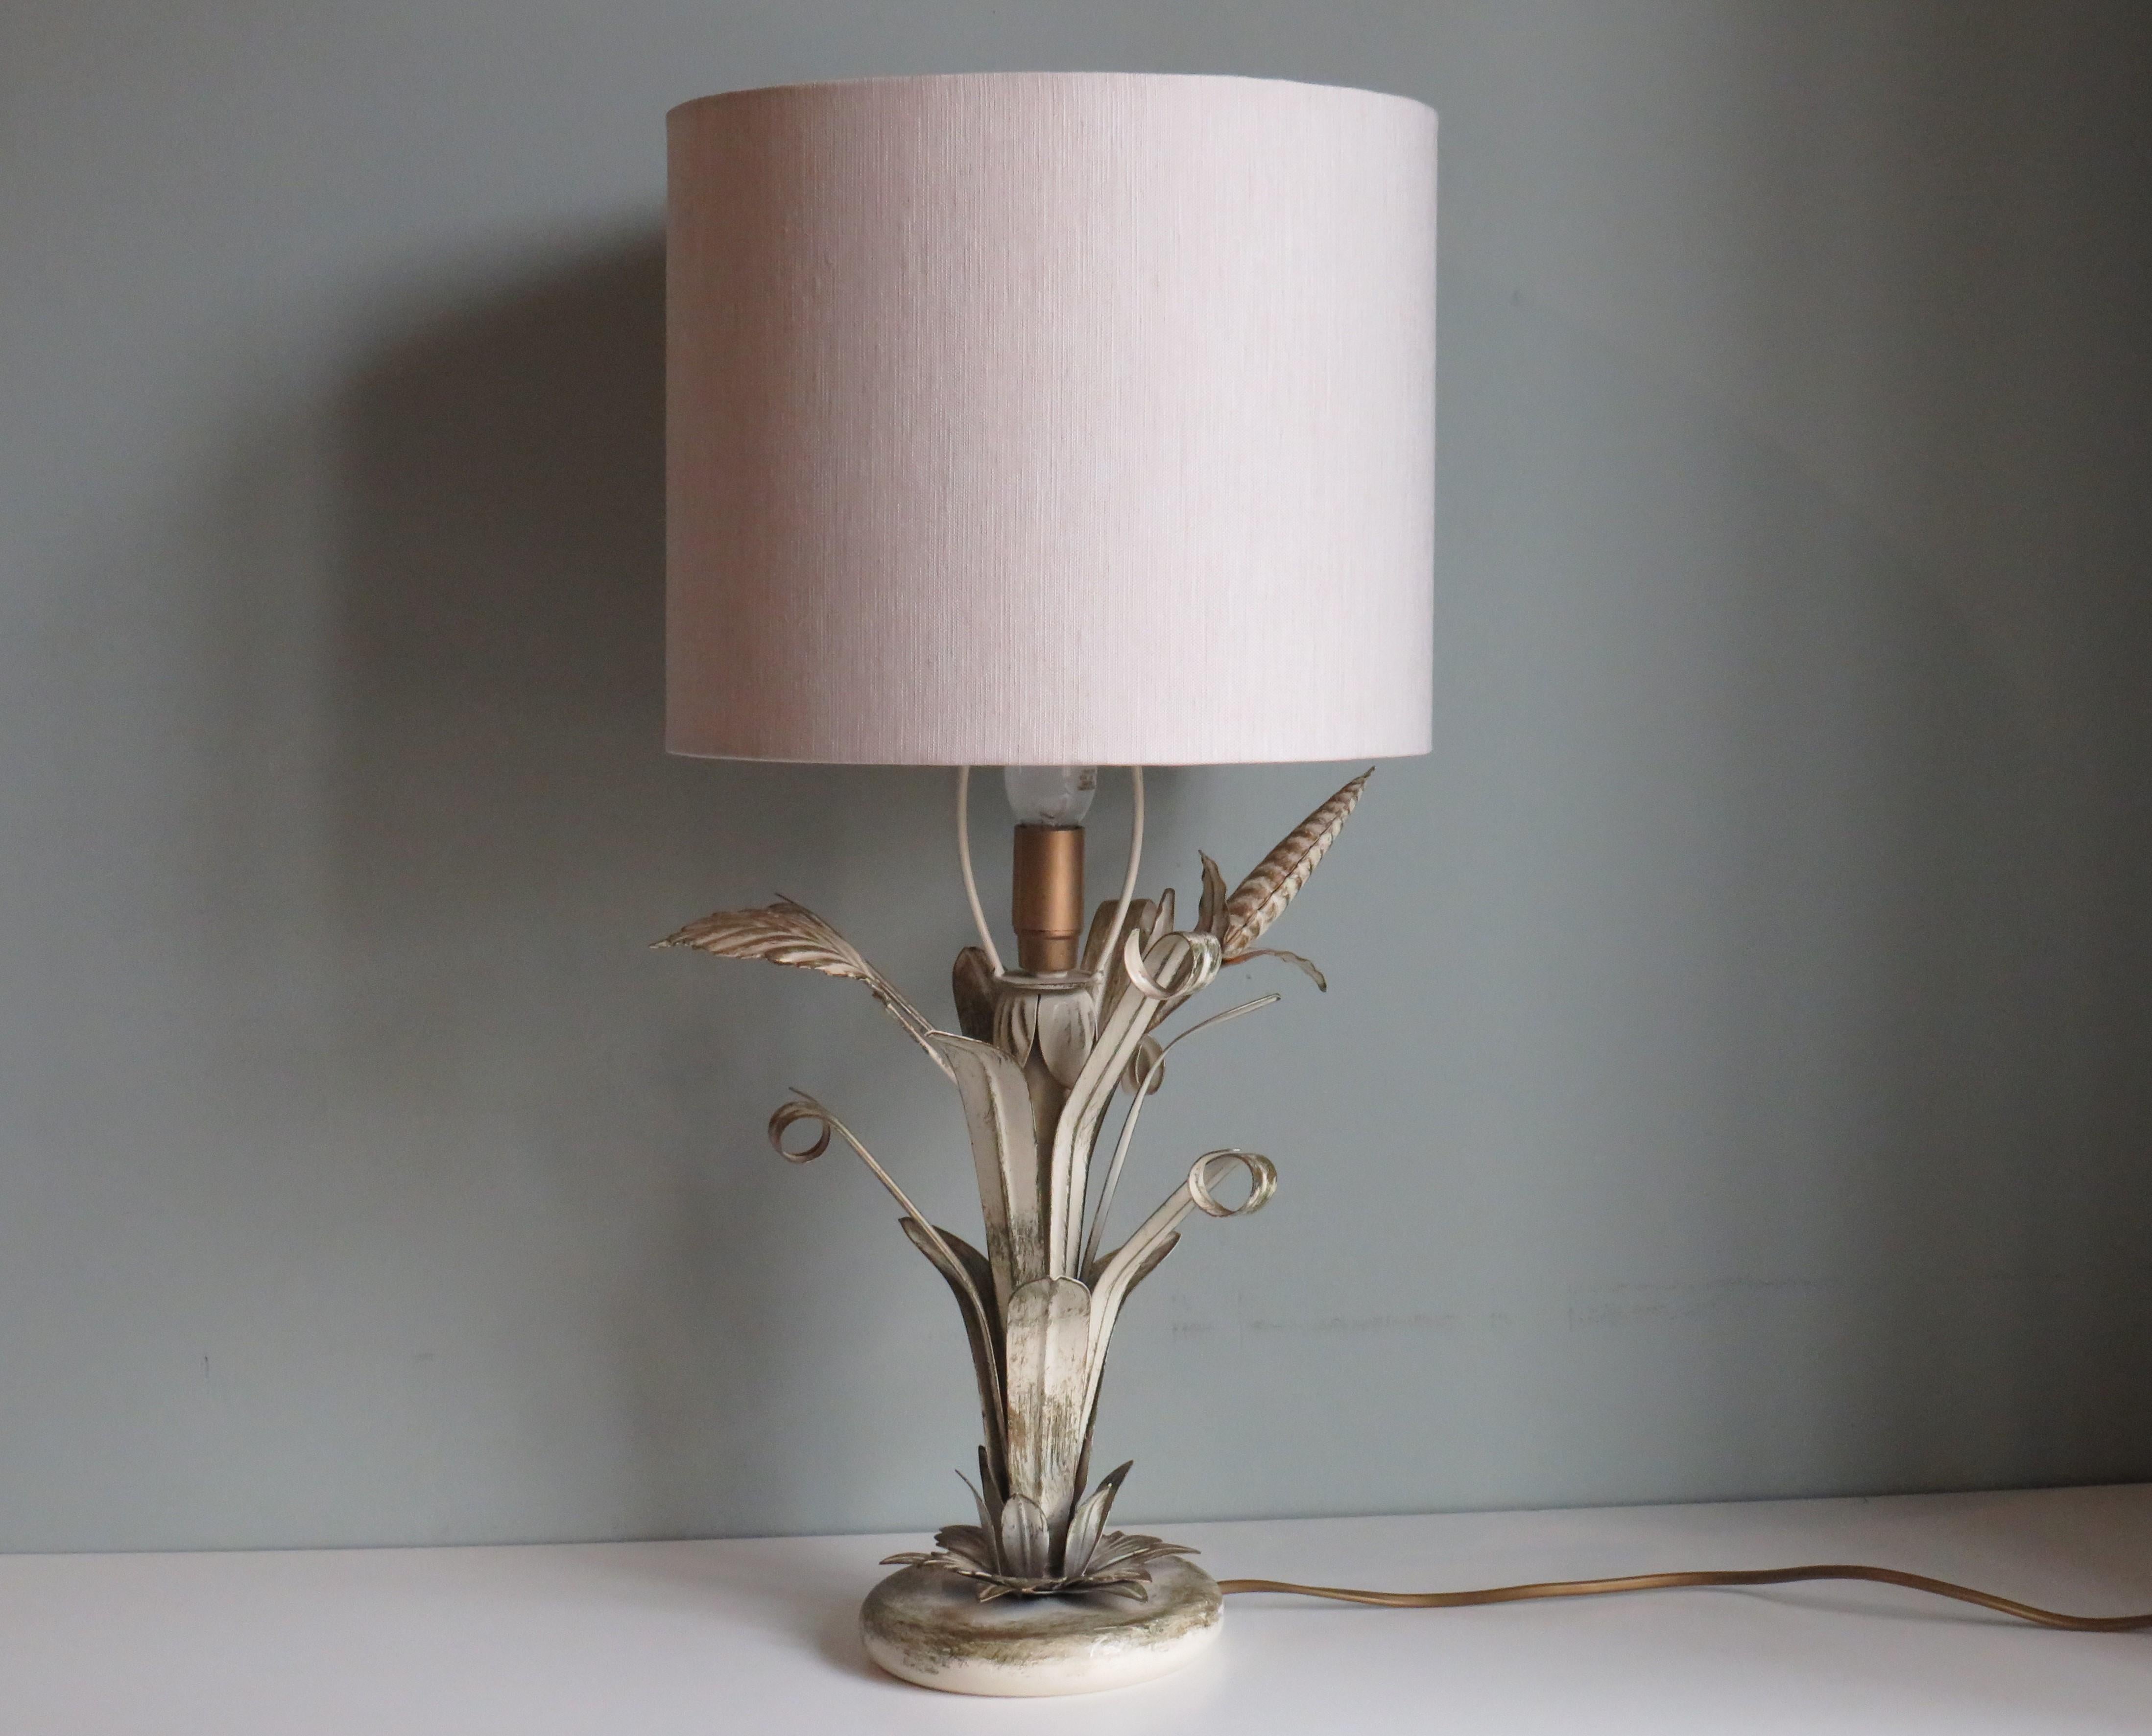 Mid Century Table Lamp in the style of Hans Kögl, Italy 1960s
Toleware hand-painted table lamp in green and white tones with a light beige linen lampshade and 1 E 14 fitting.
The lamp is also equipped with an on and off button (on the cord).
The